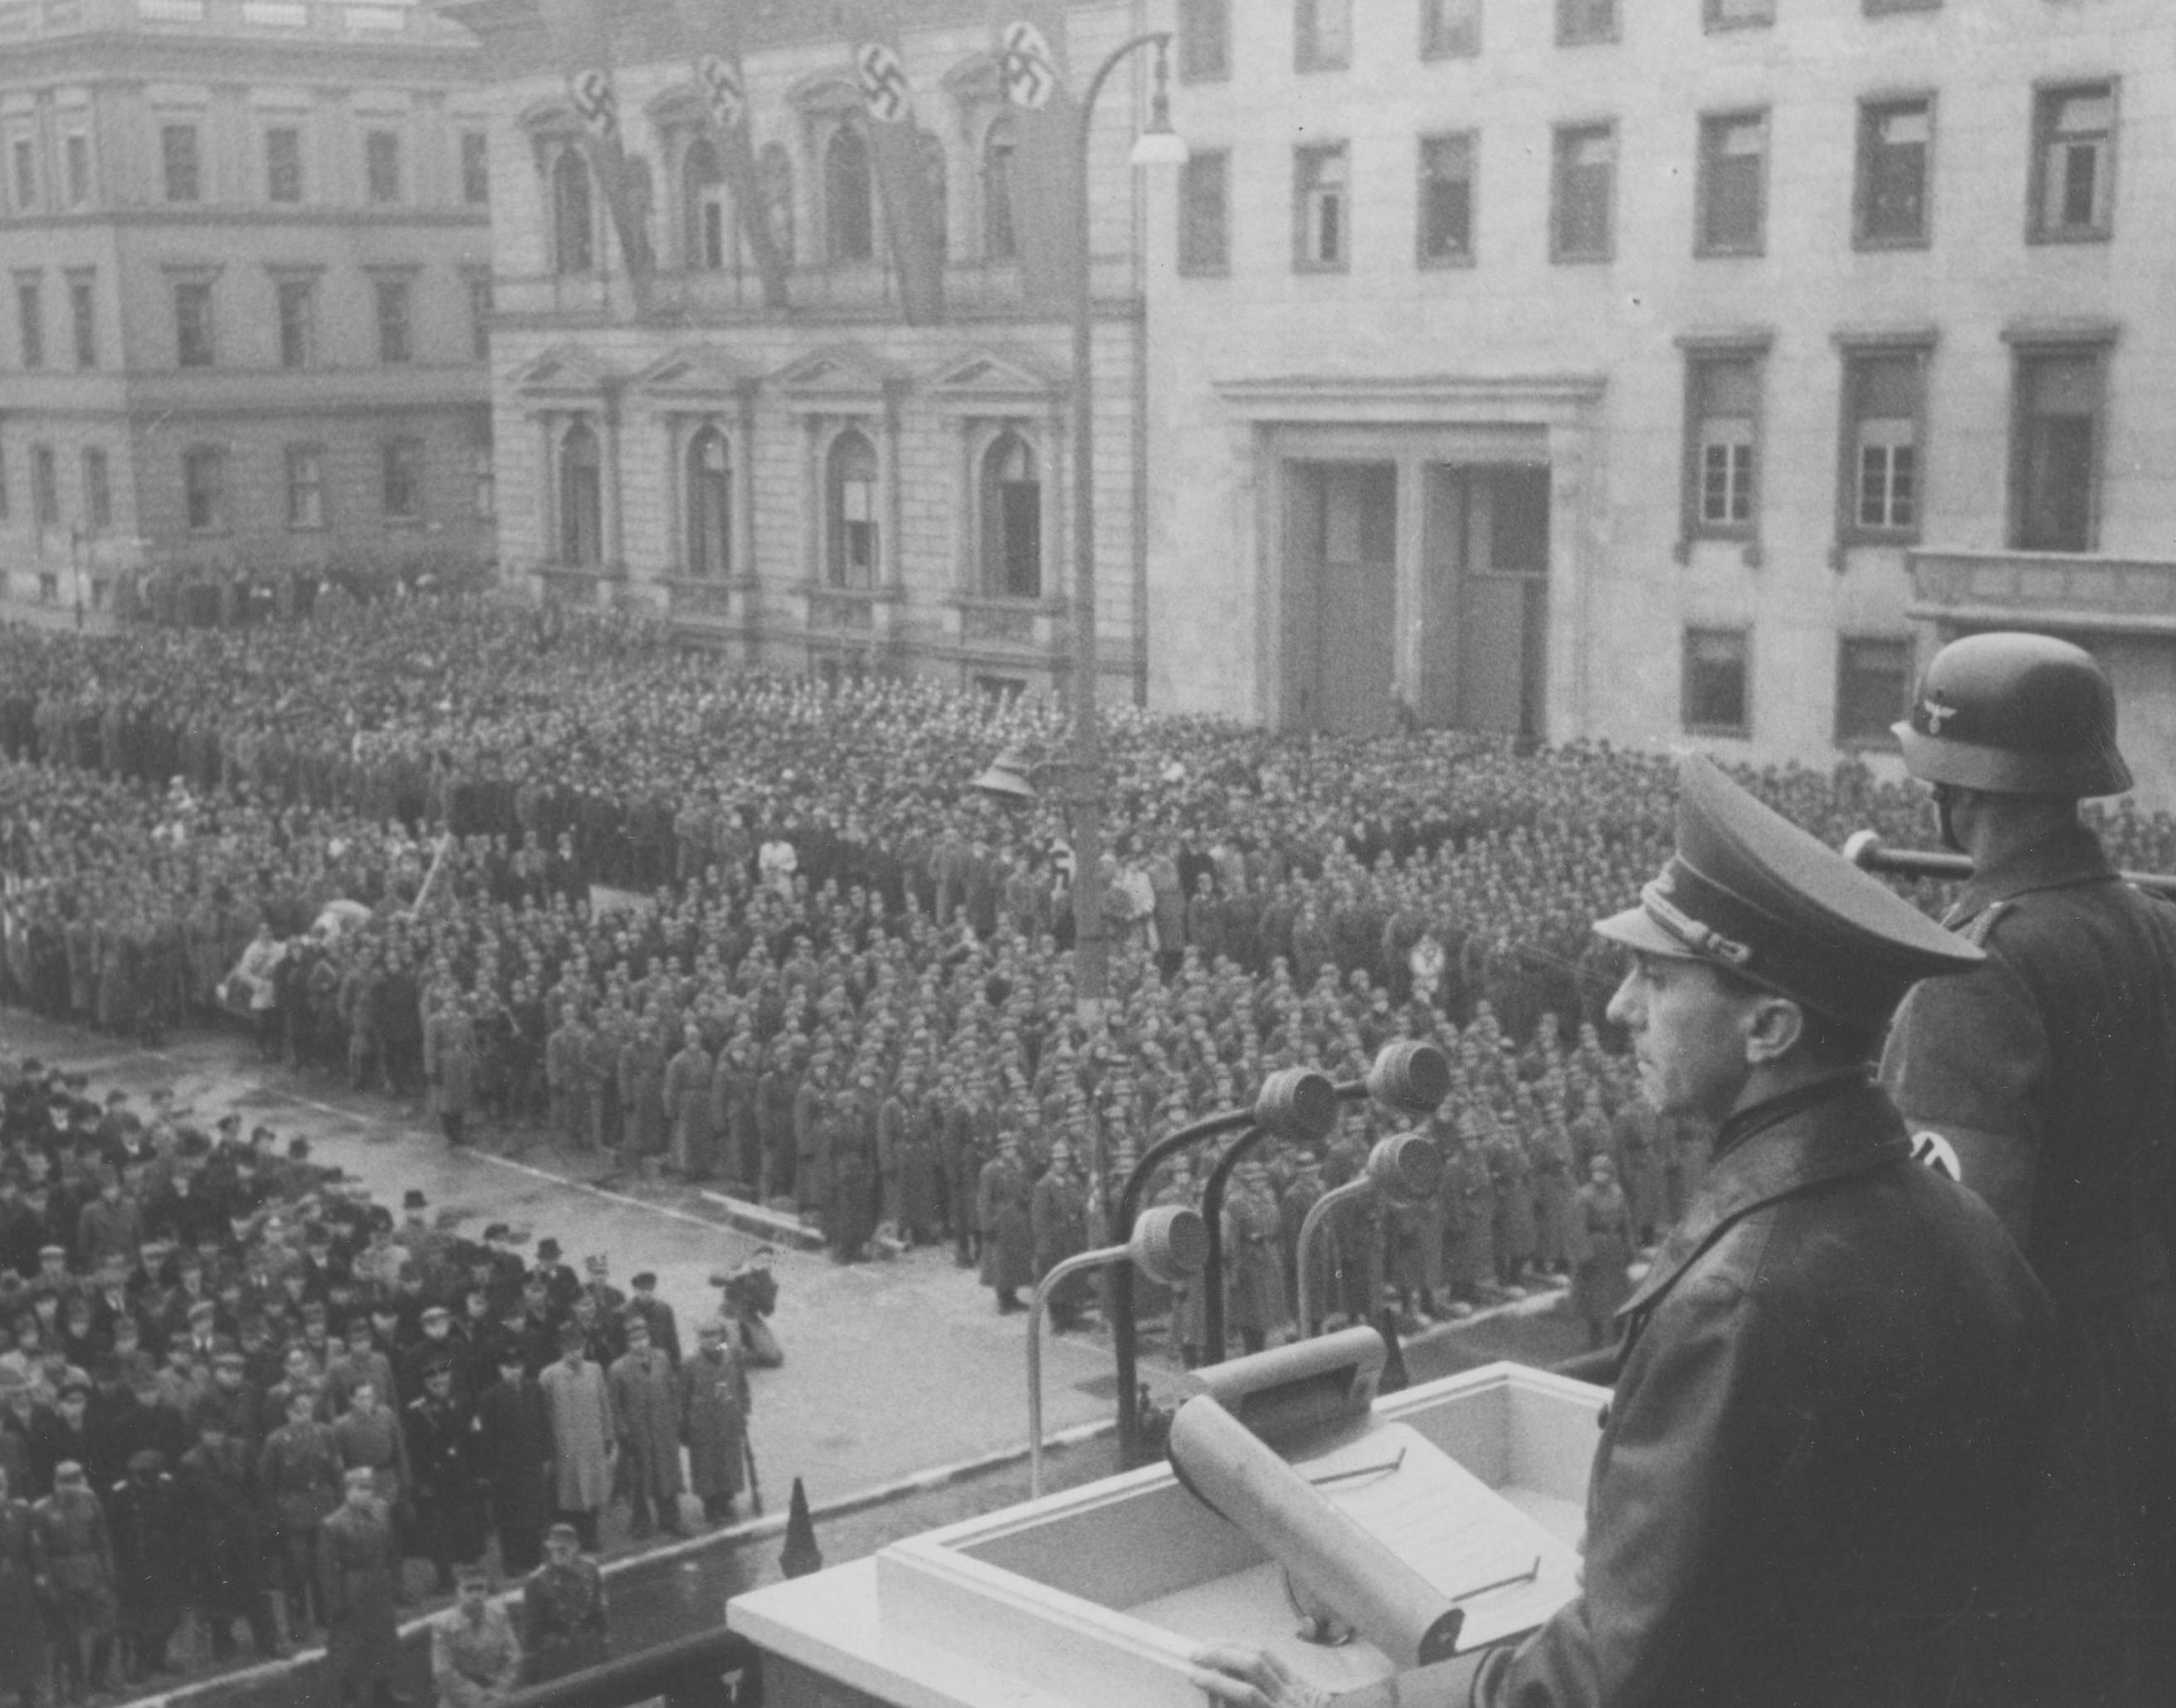 In addition to print propaganda, Goebbels (center right) incited mobs with inflammatory speeches on broadcast media and at large rallies. / Polish State Archive